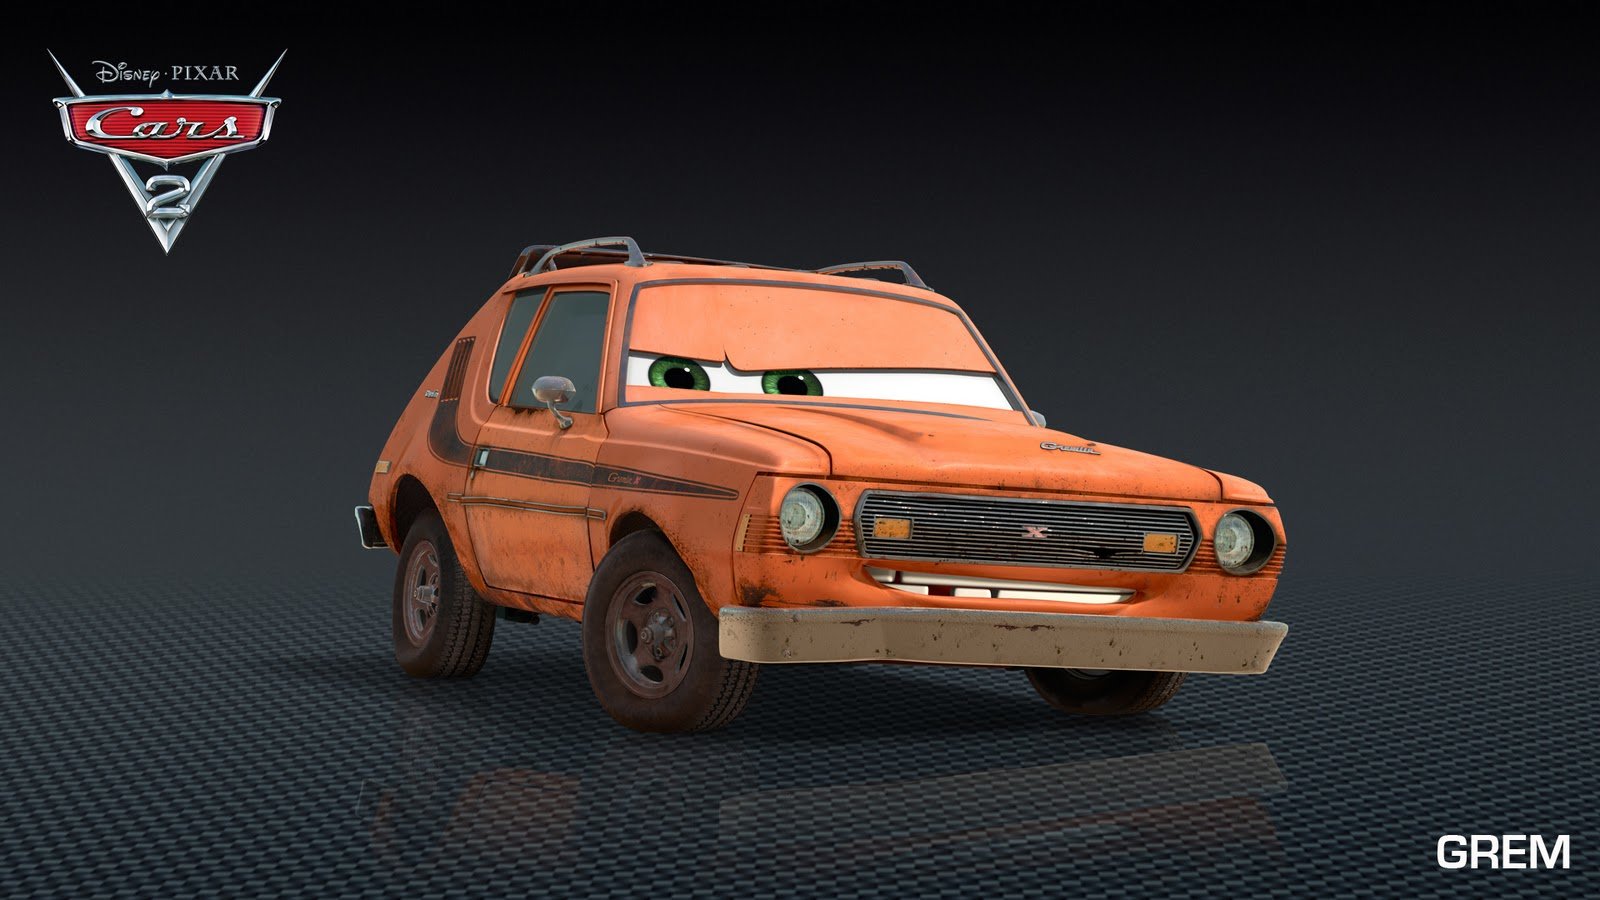 Awesome Cars 2 Free Background Id - Amc Gremlin Cars 2 - HD Wallpaper 